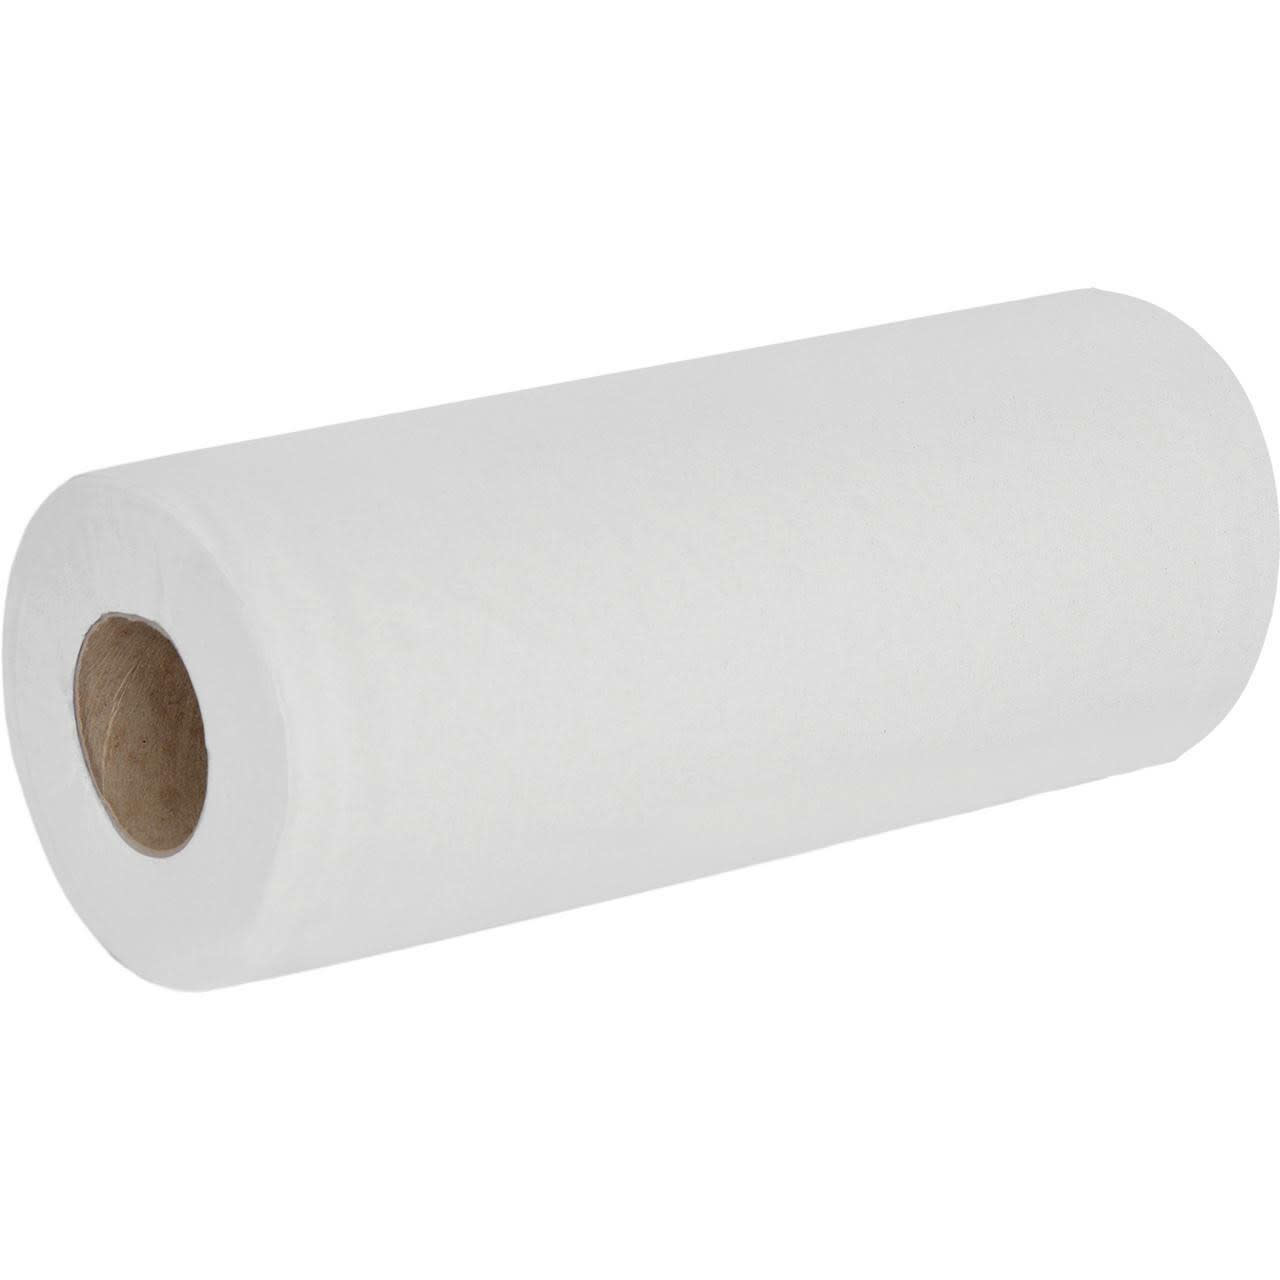 Couch Roll Small 10 inch